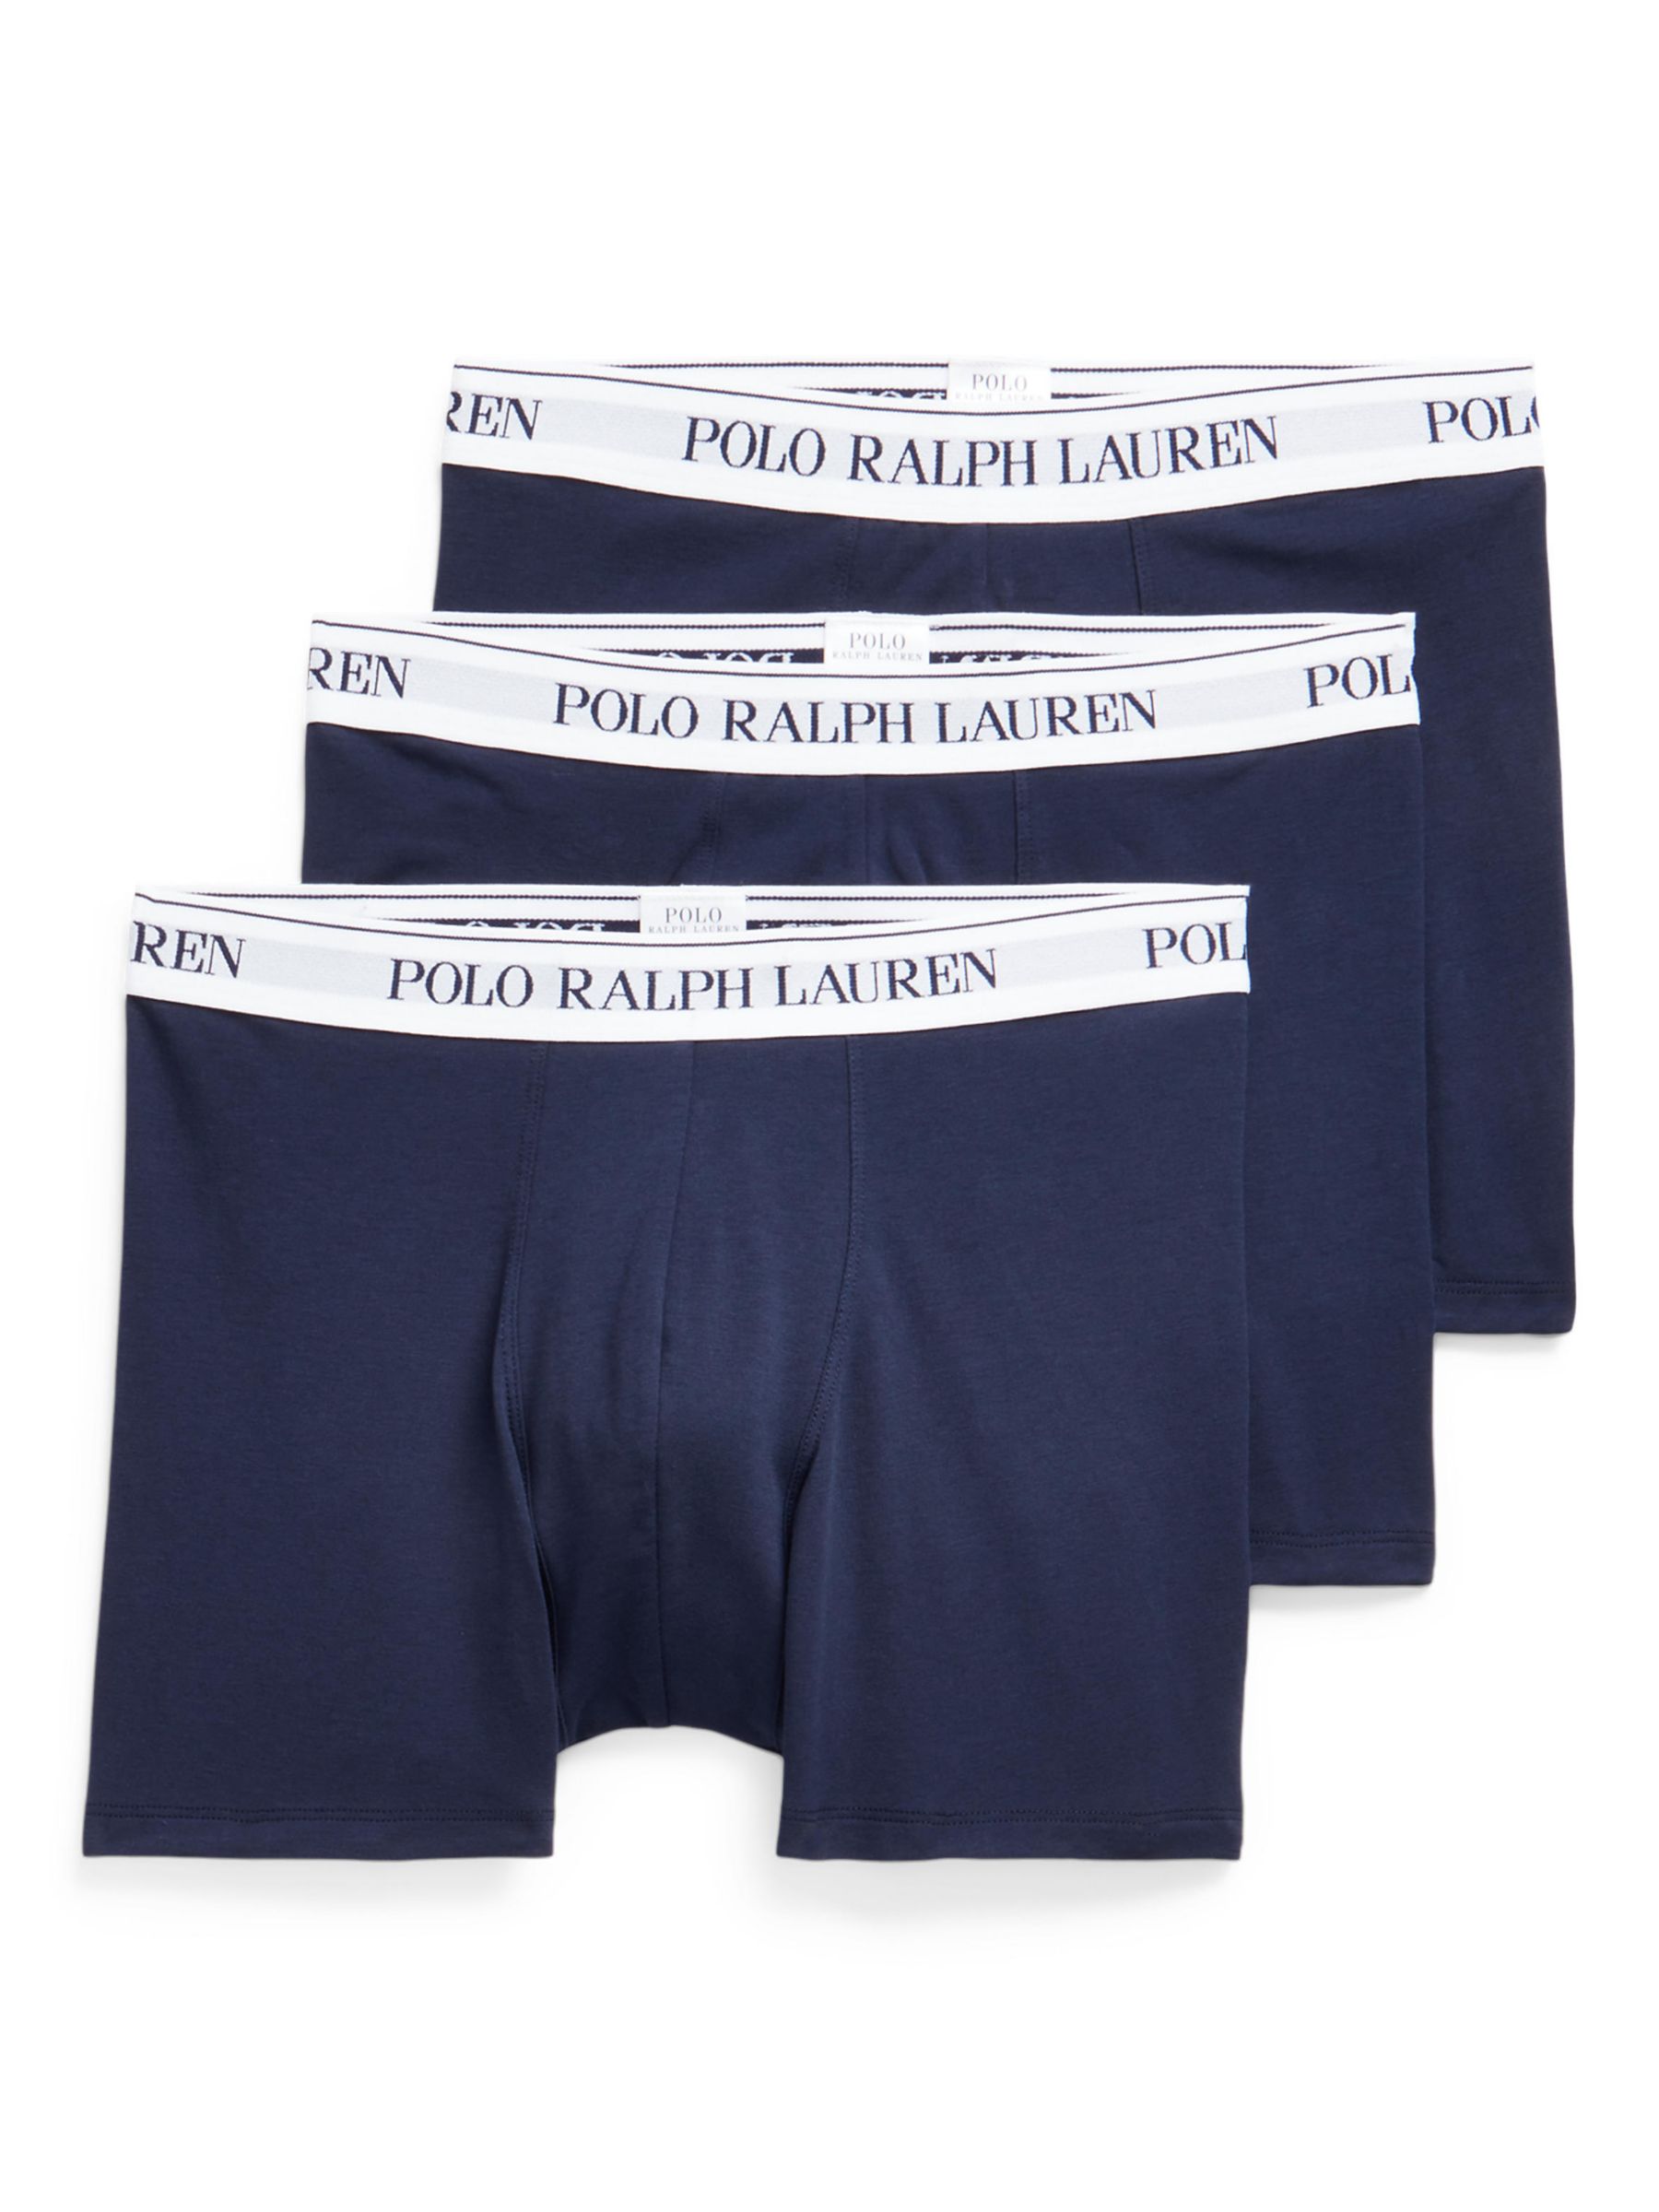 Polo Ralph Lauren 3 Pack Open Boxer, Save 20% on Subscription